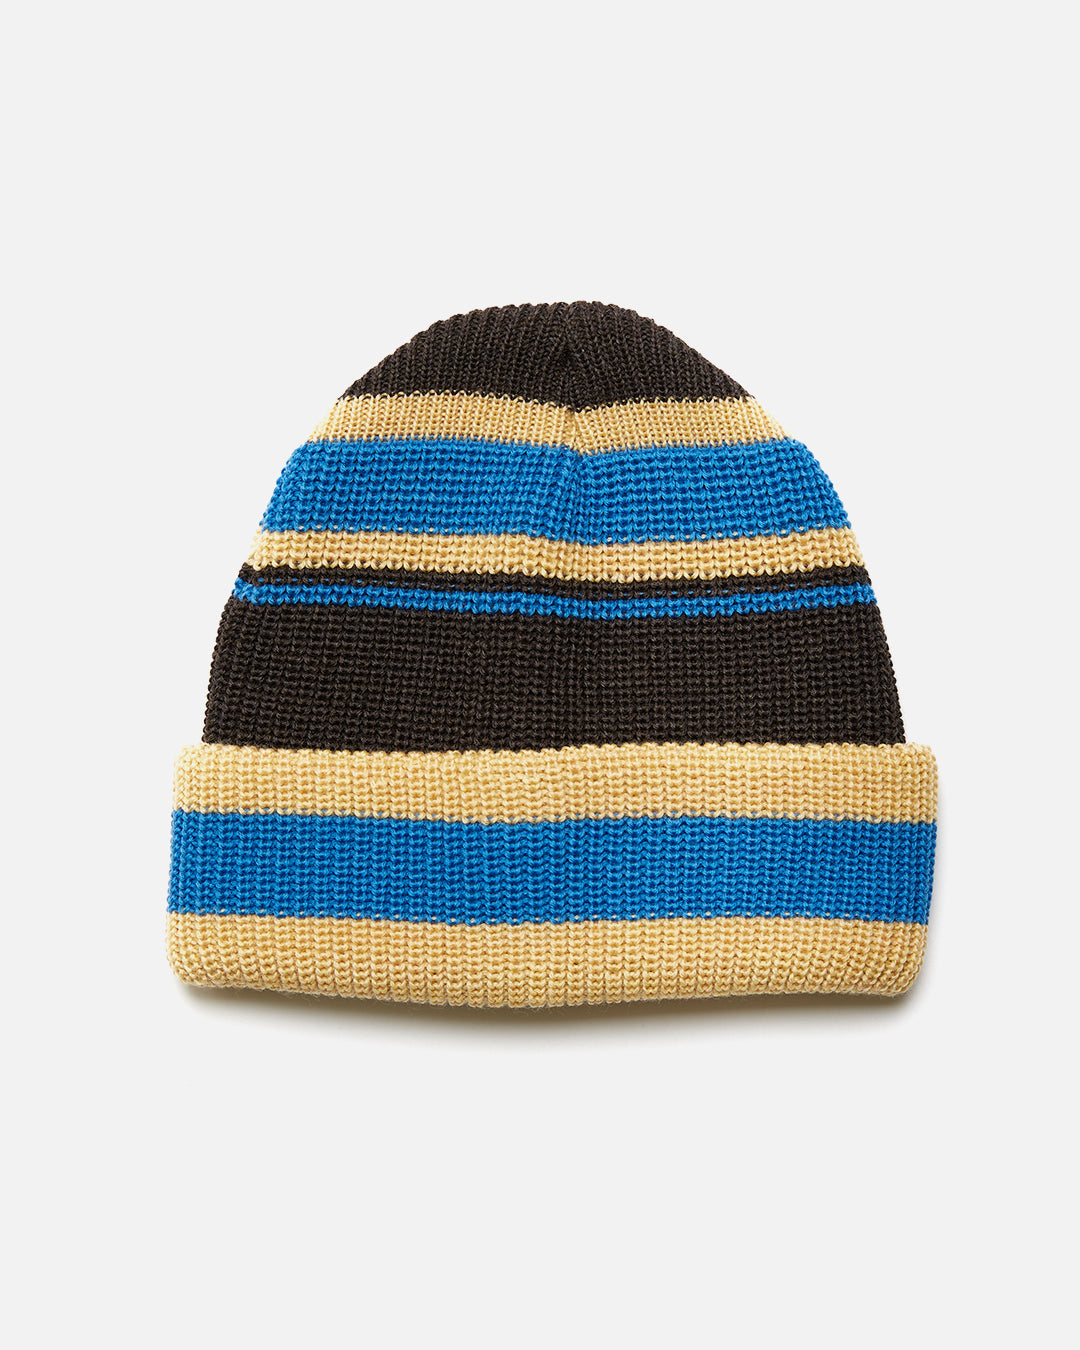 Confection Knit Beanie - Blue / Yellow / Grey